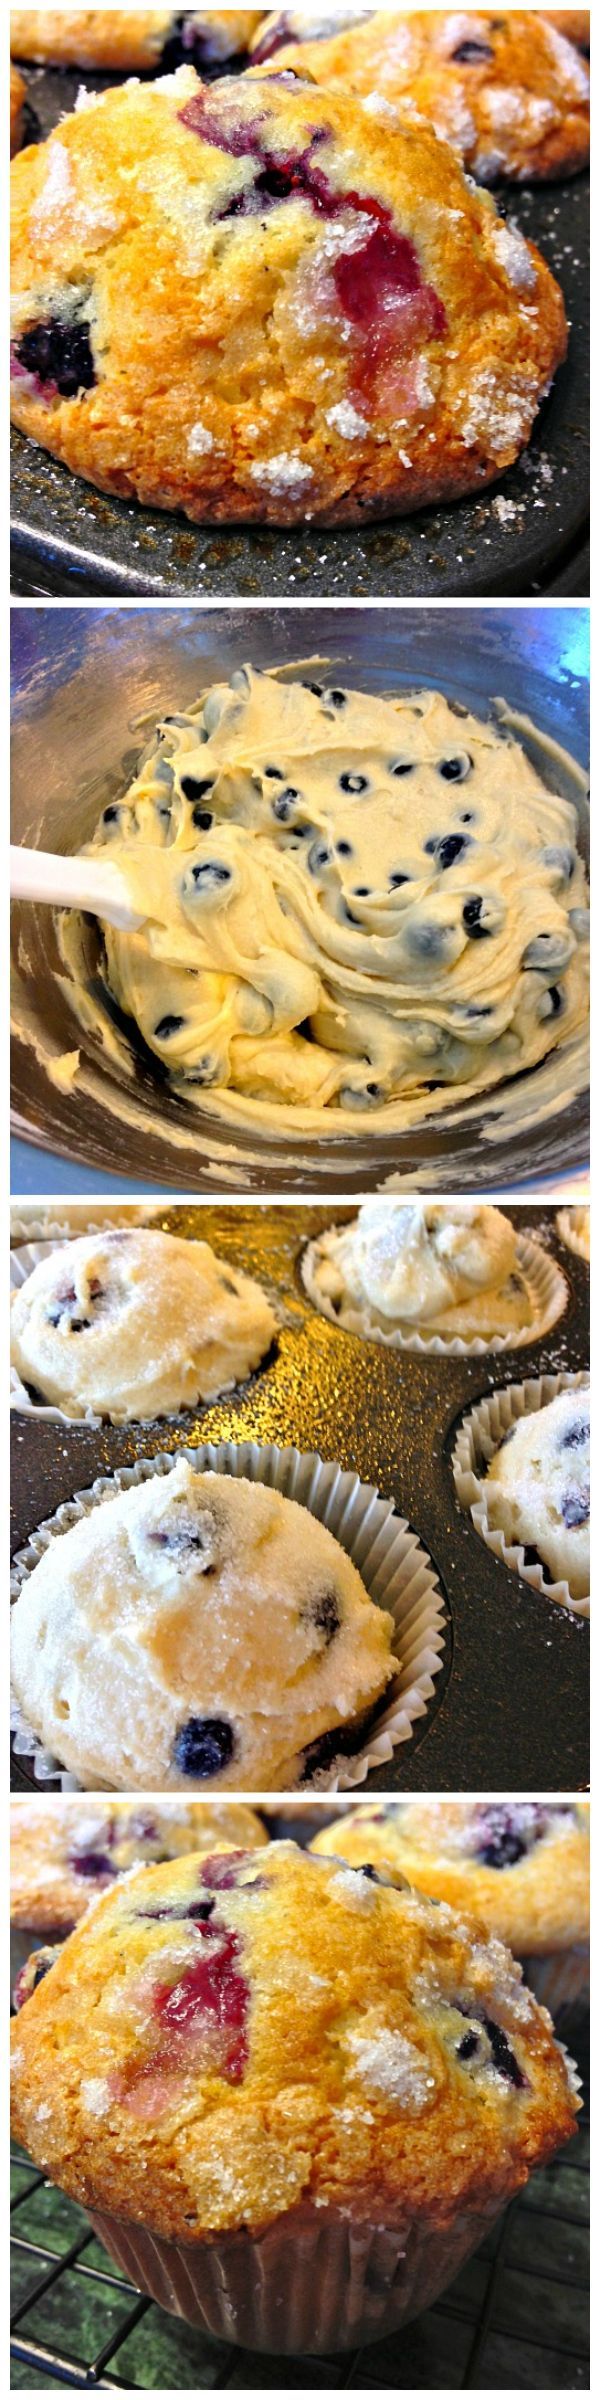 Our Bakery Style Blueberry Muffins are moist & bursting with juicy blueberries! Quite possibly the most scrumptious blueberry